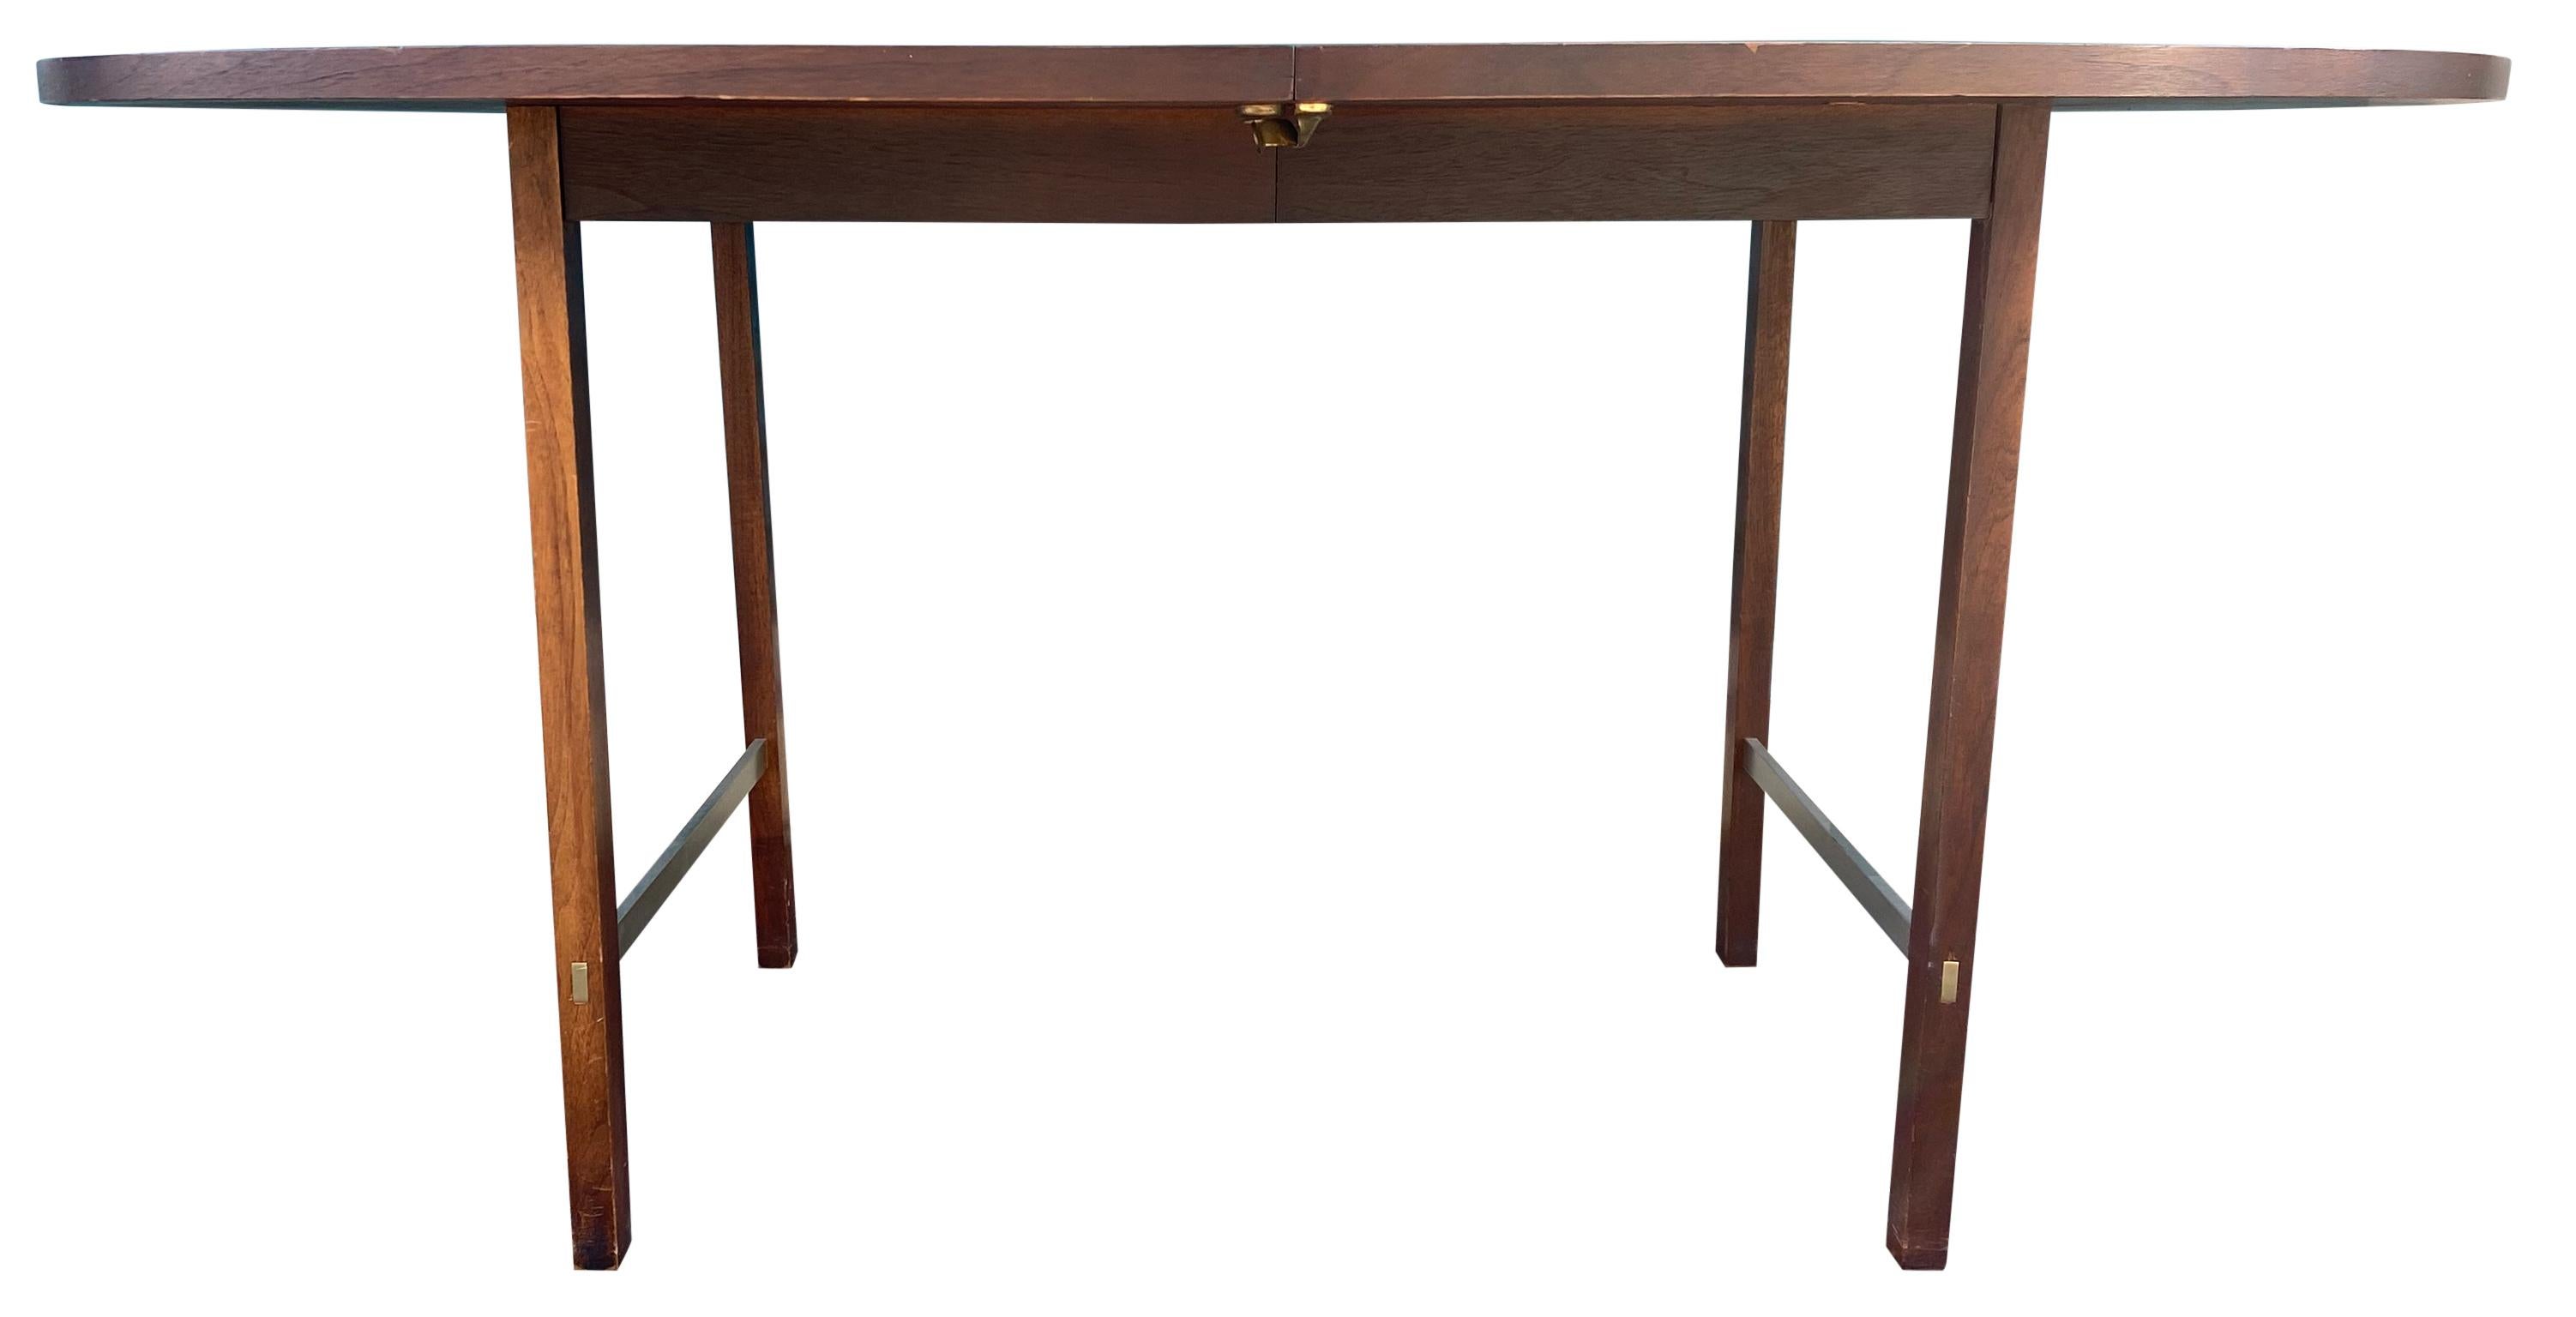 American Mid-Century Modern Walnut Dining Table by Paul McCobb for Calvin 2 Leaves